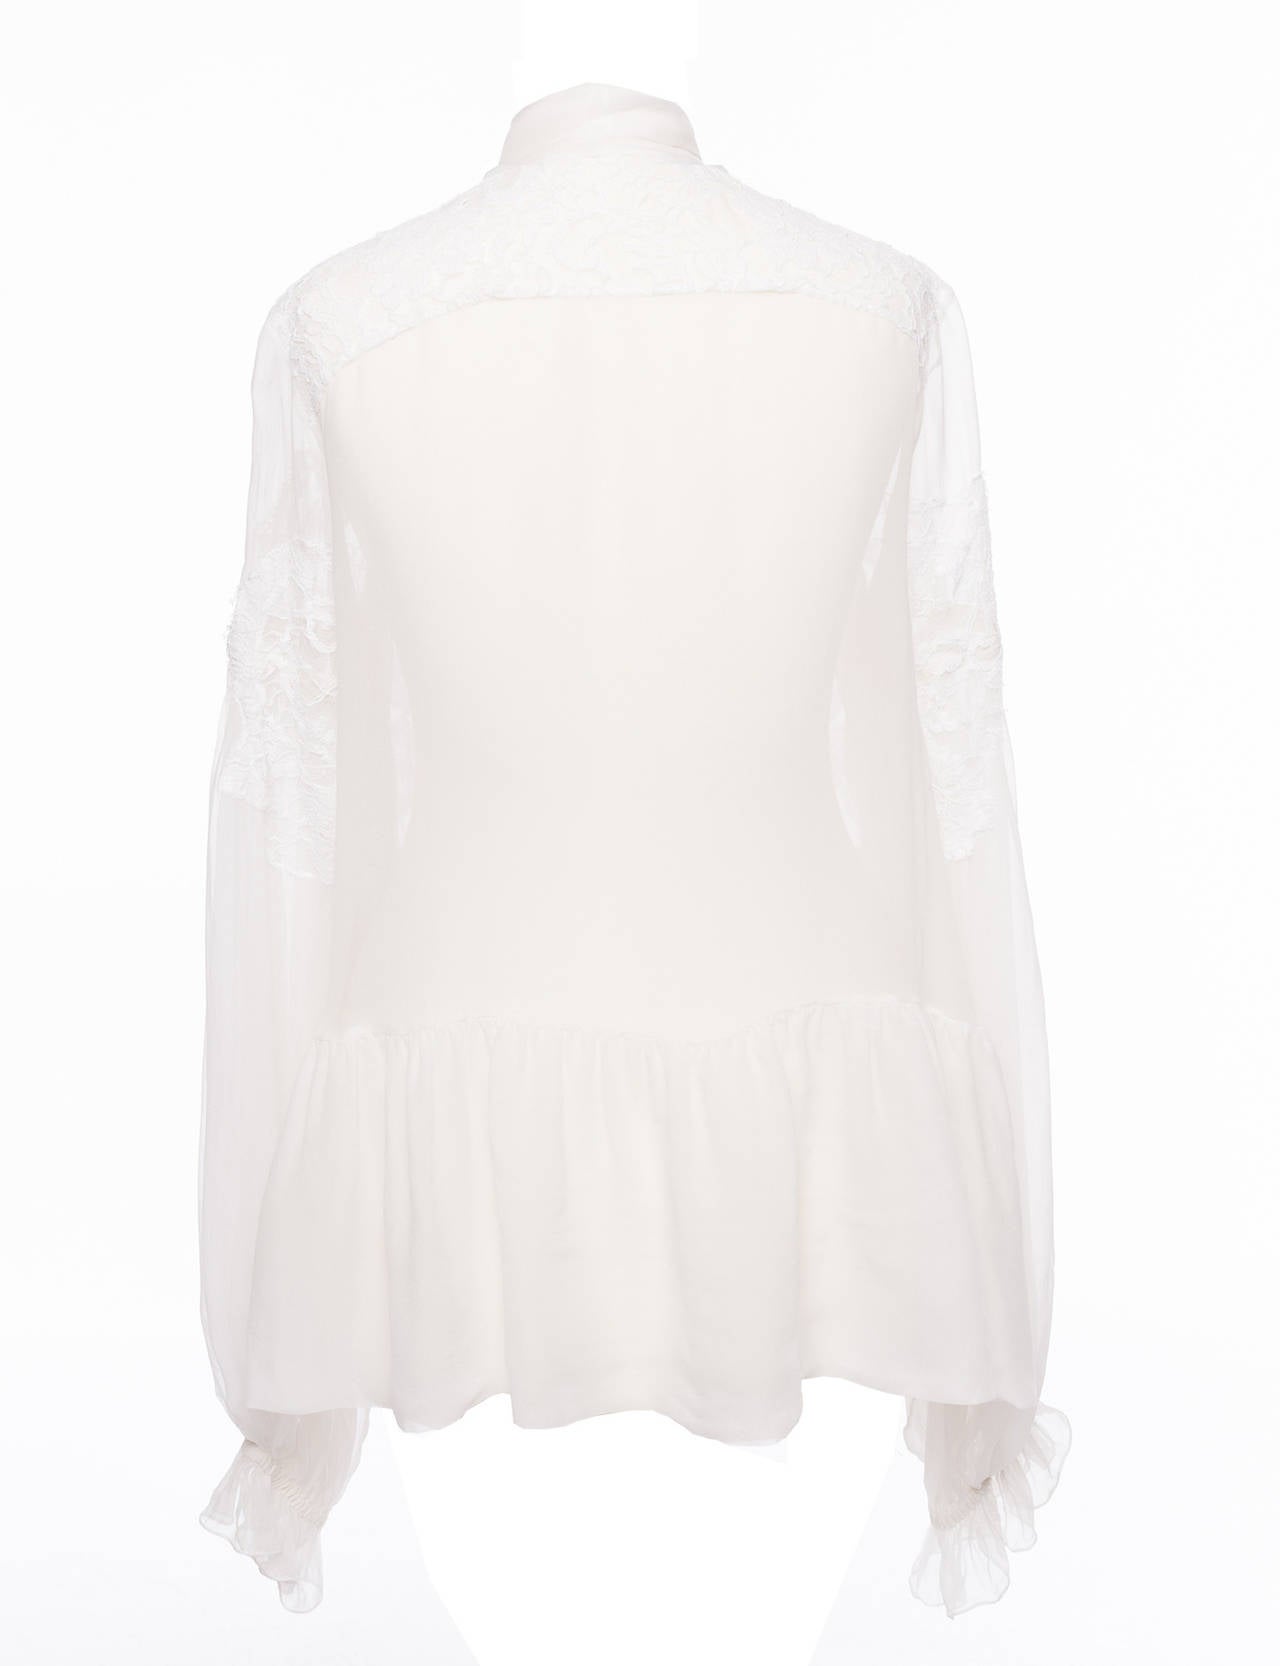 Givenchy by Ricardo Tisci silk and lace peasant blouse, Sz. M 1